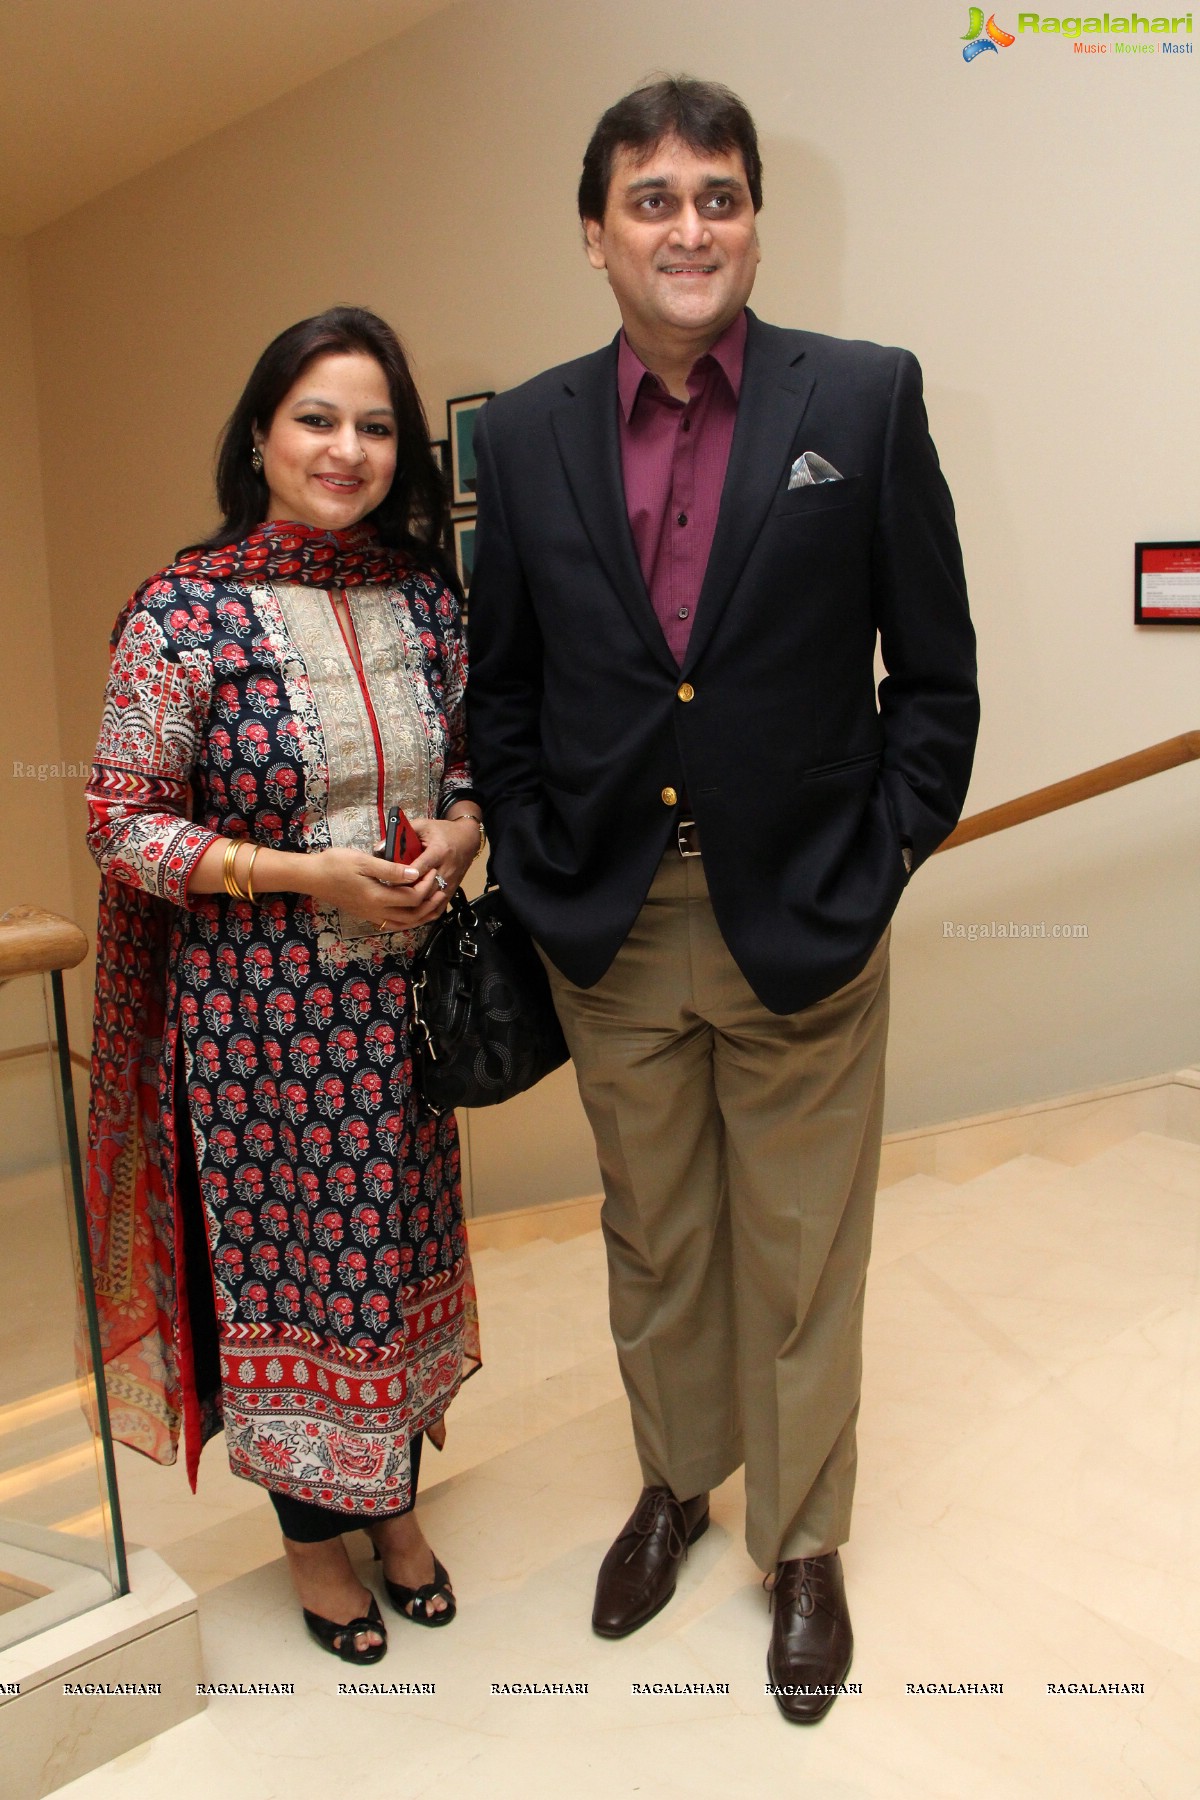 India Shastra: Reflections on the Nation in our Time - Shashi Tharoor's Book Launch